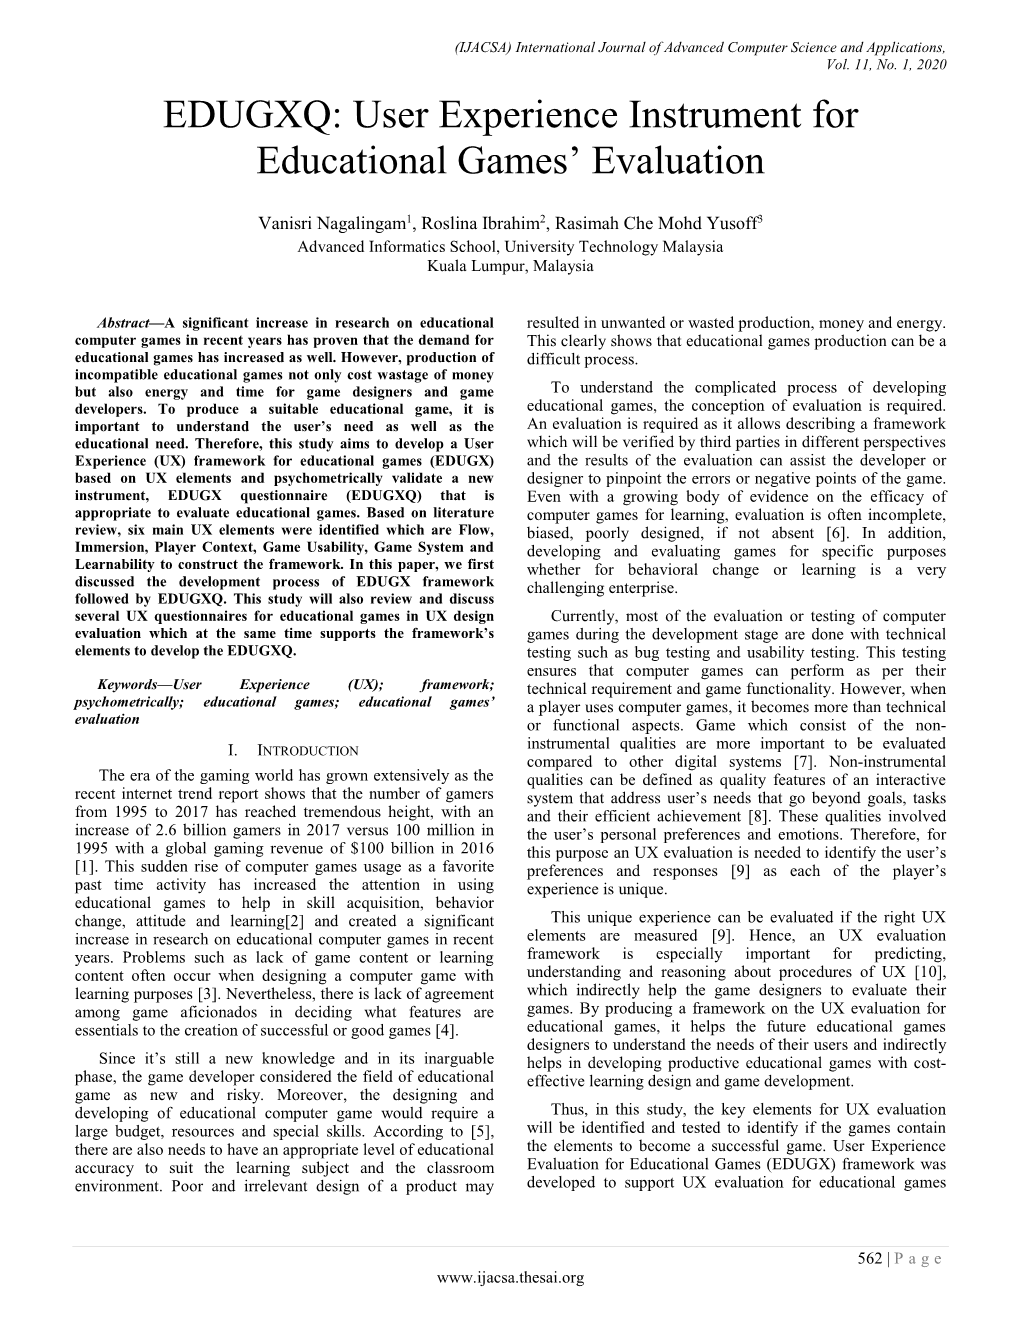 EDUGXQ: User Experience Instrument for Educational Games' Evaluation